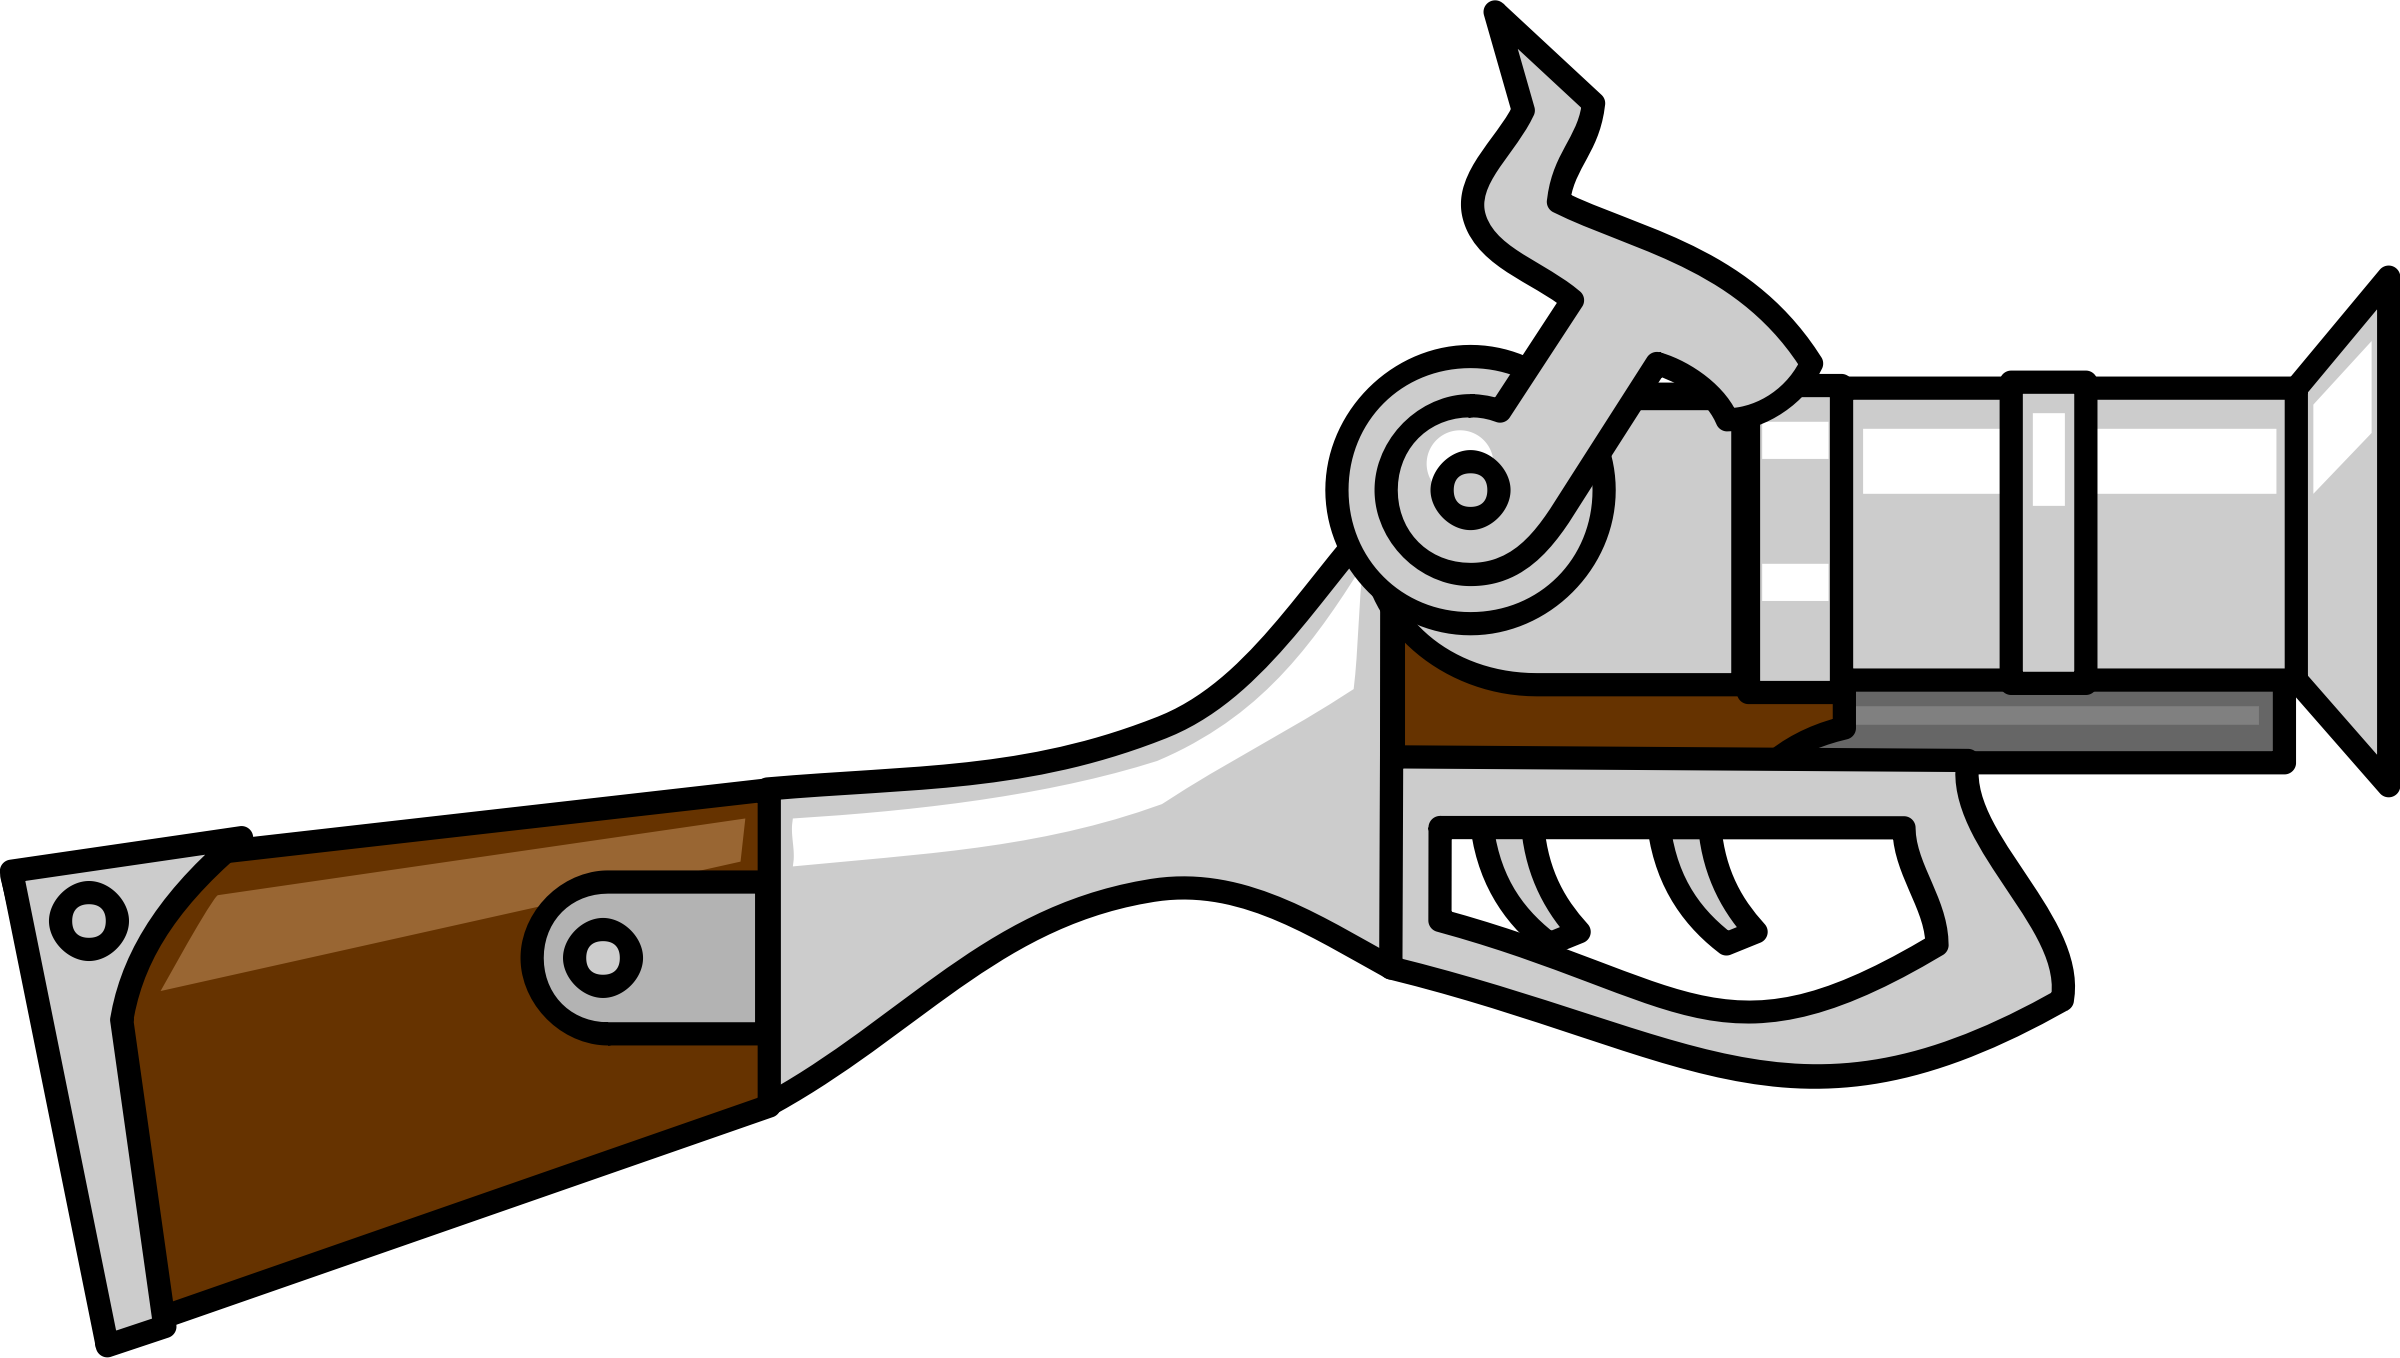 Download and share clipart about Clipart Gun - Desenho De Arma, Find more h...